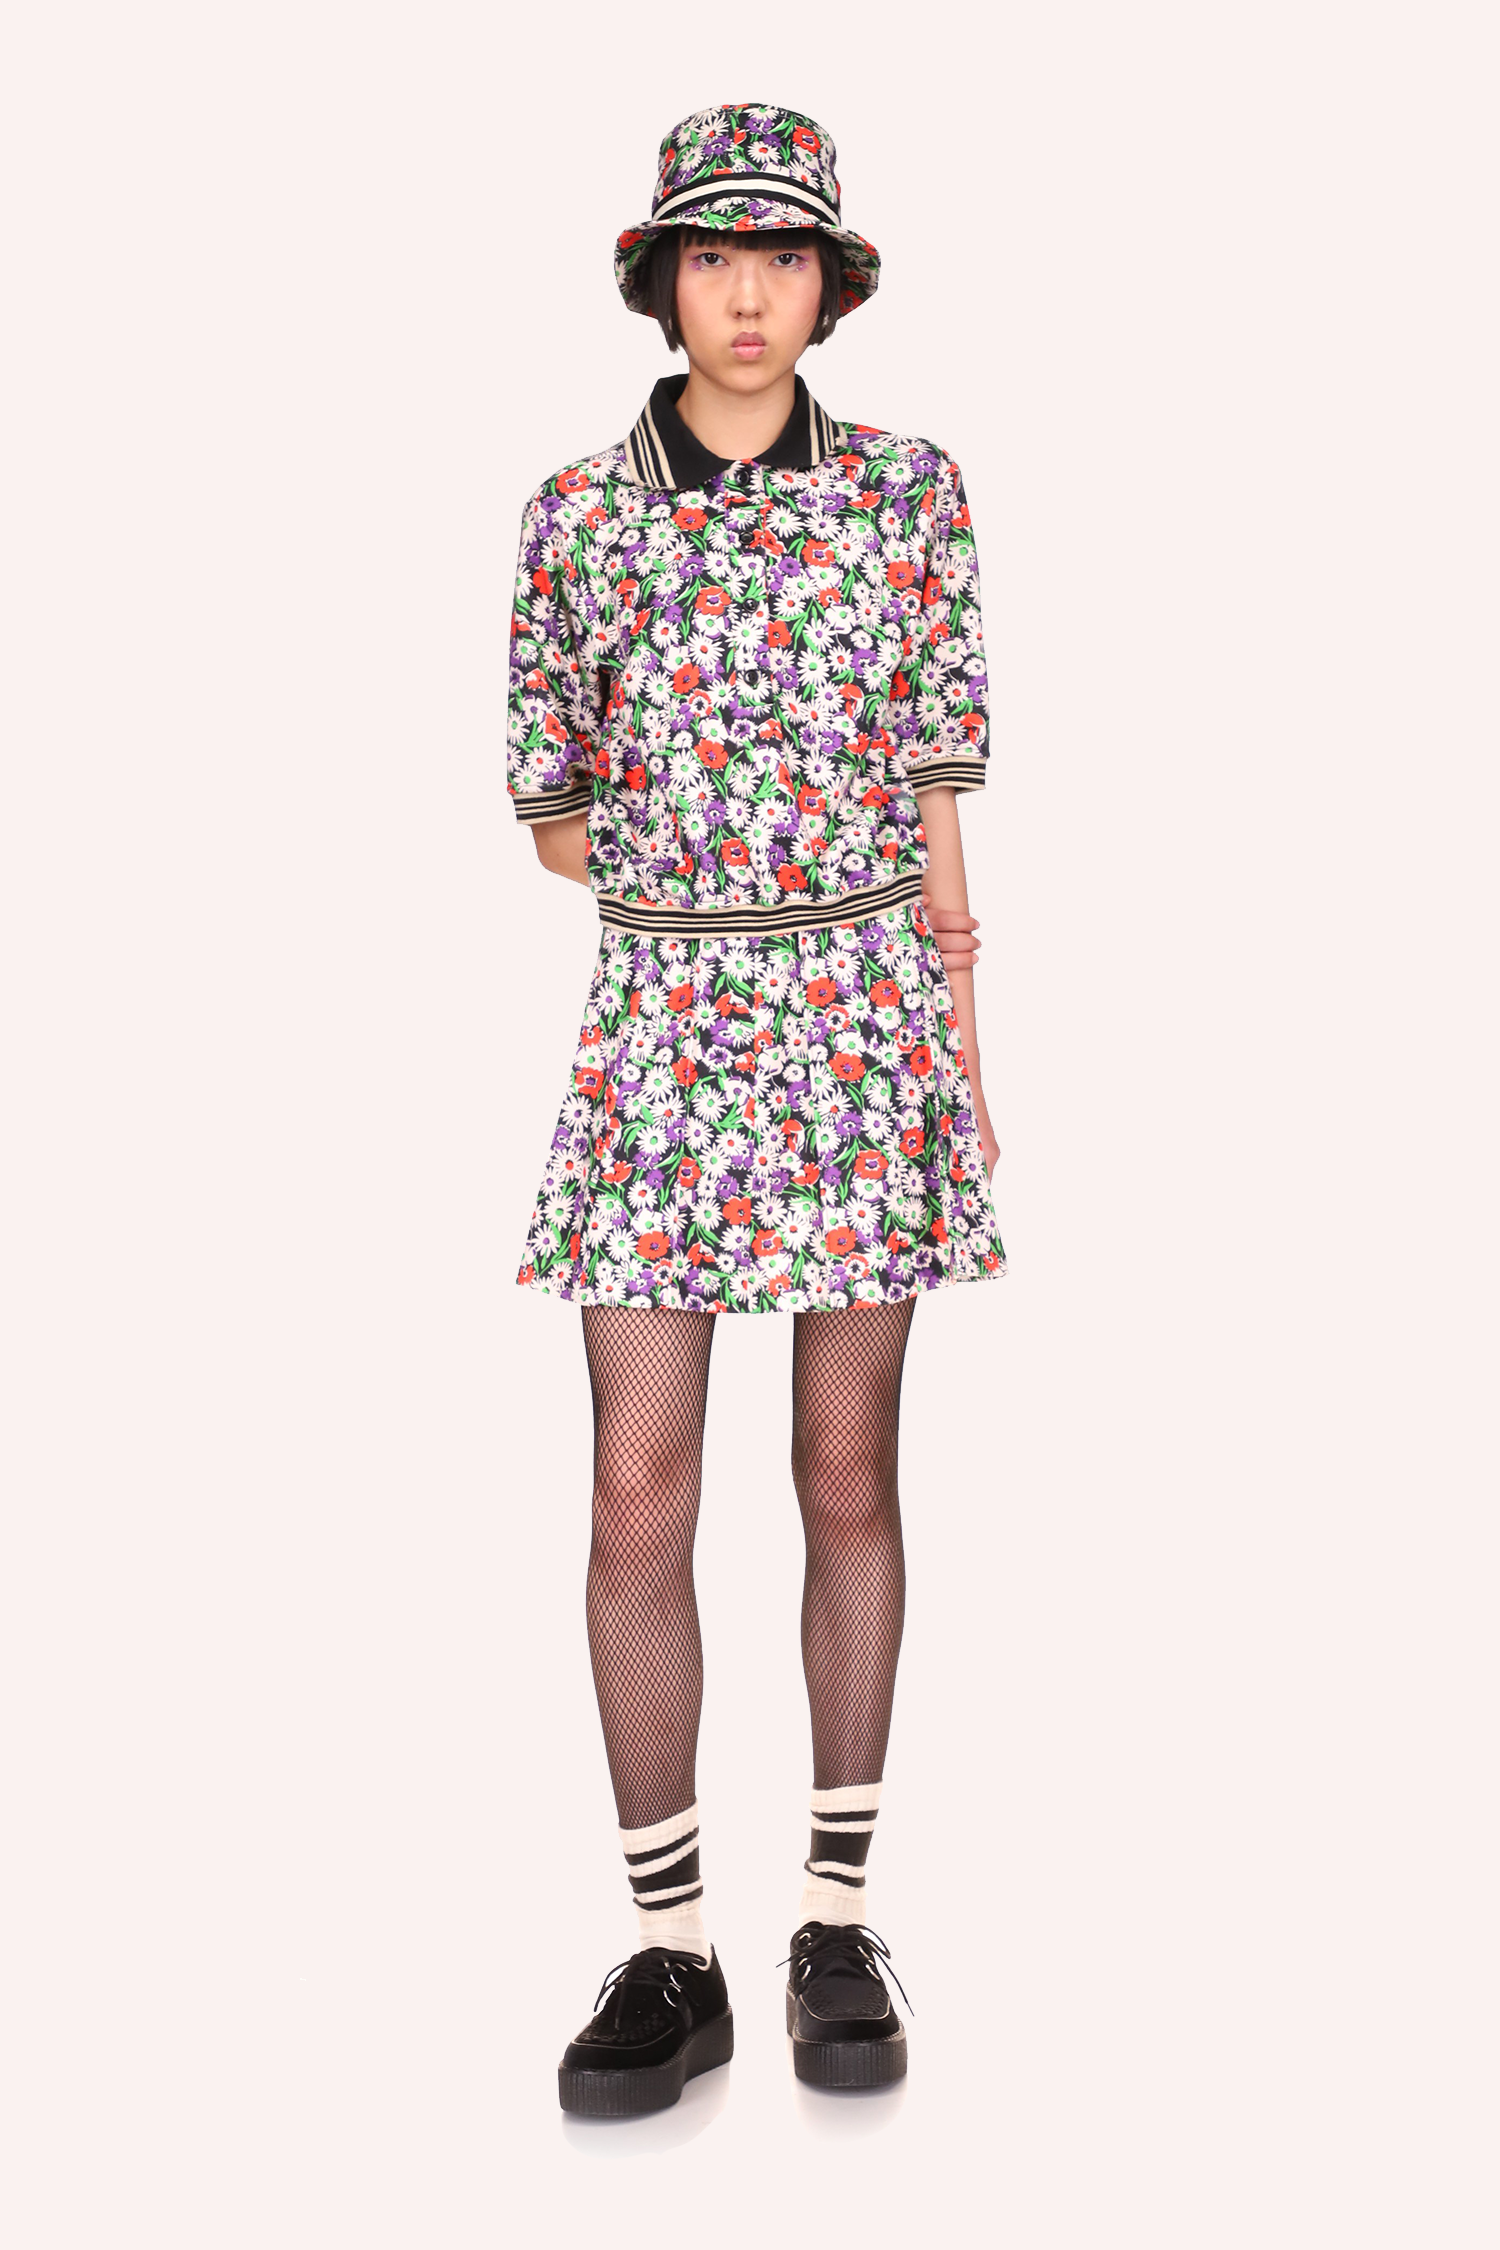 The entire skirt and top ensemble, Daisies skirt Top Rouge and Daisies Polo Top Rouge is very springlike 